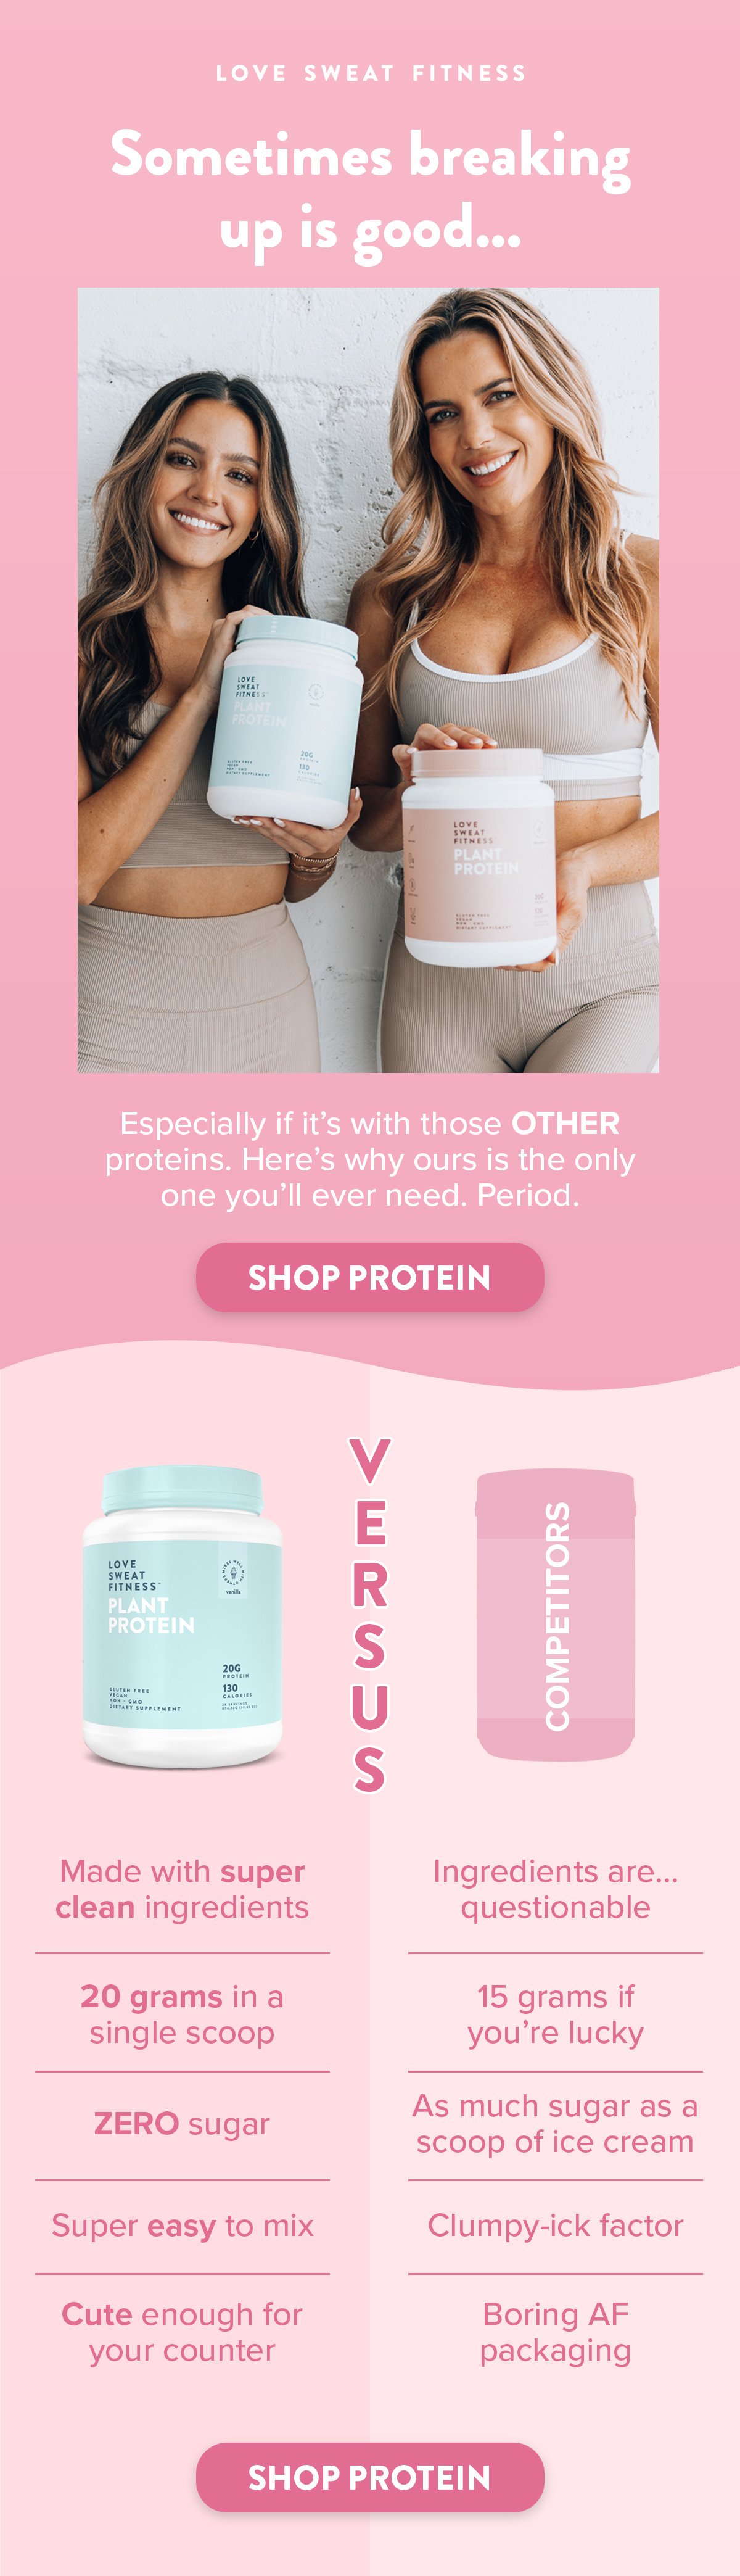 Protein Competitors_Email.jpg